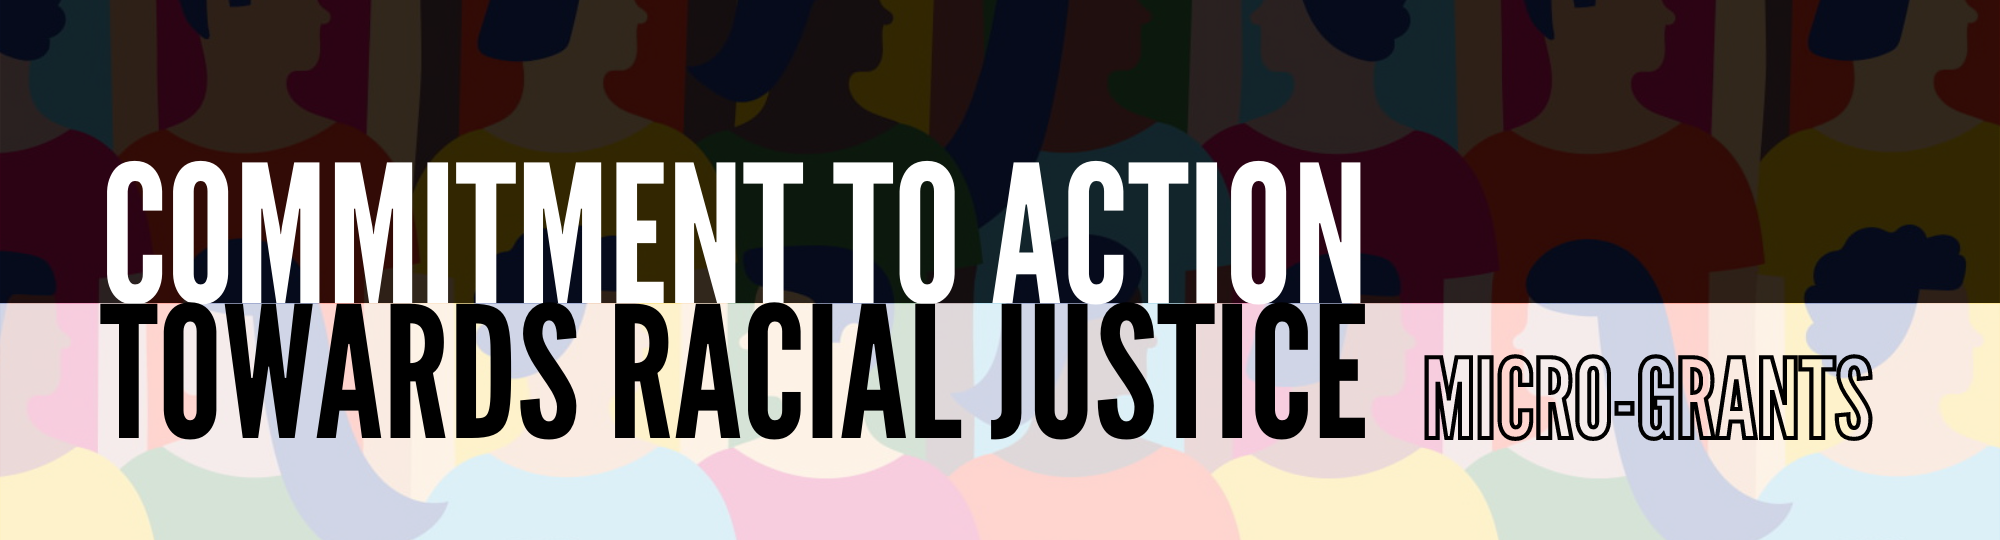 Commitment to Action towards Racial Justice Micro-Grants